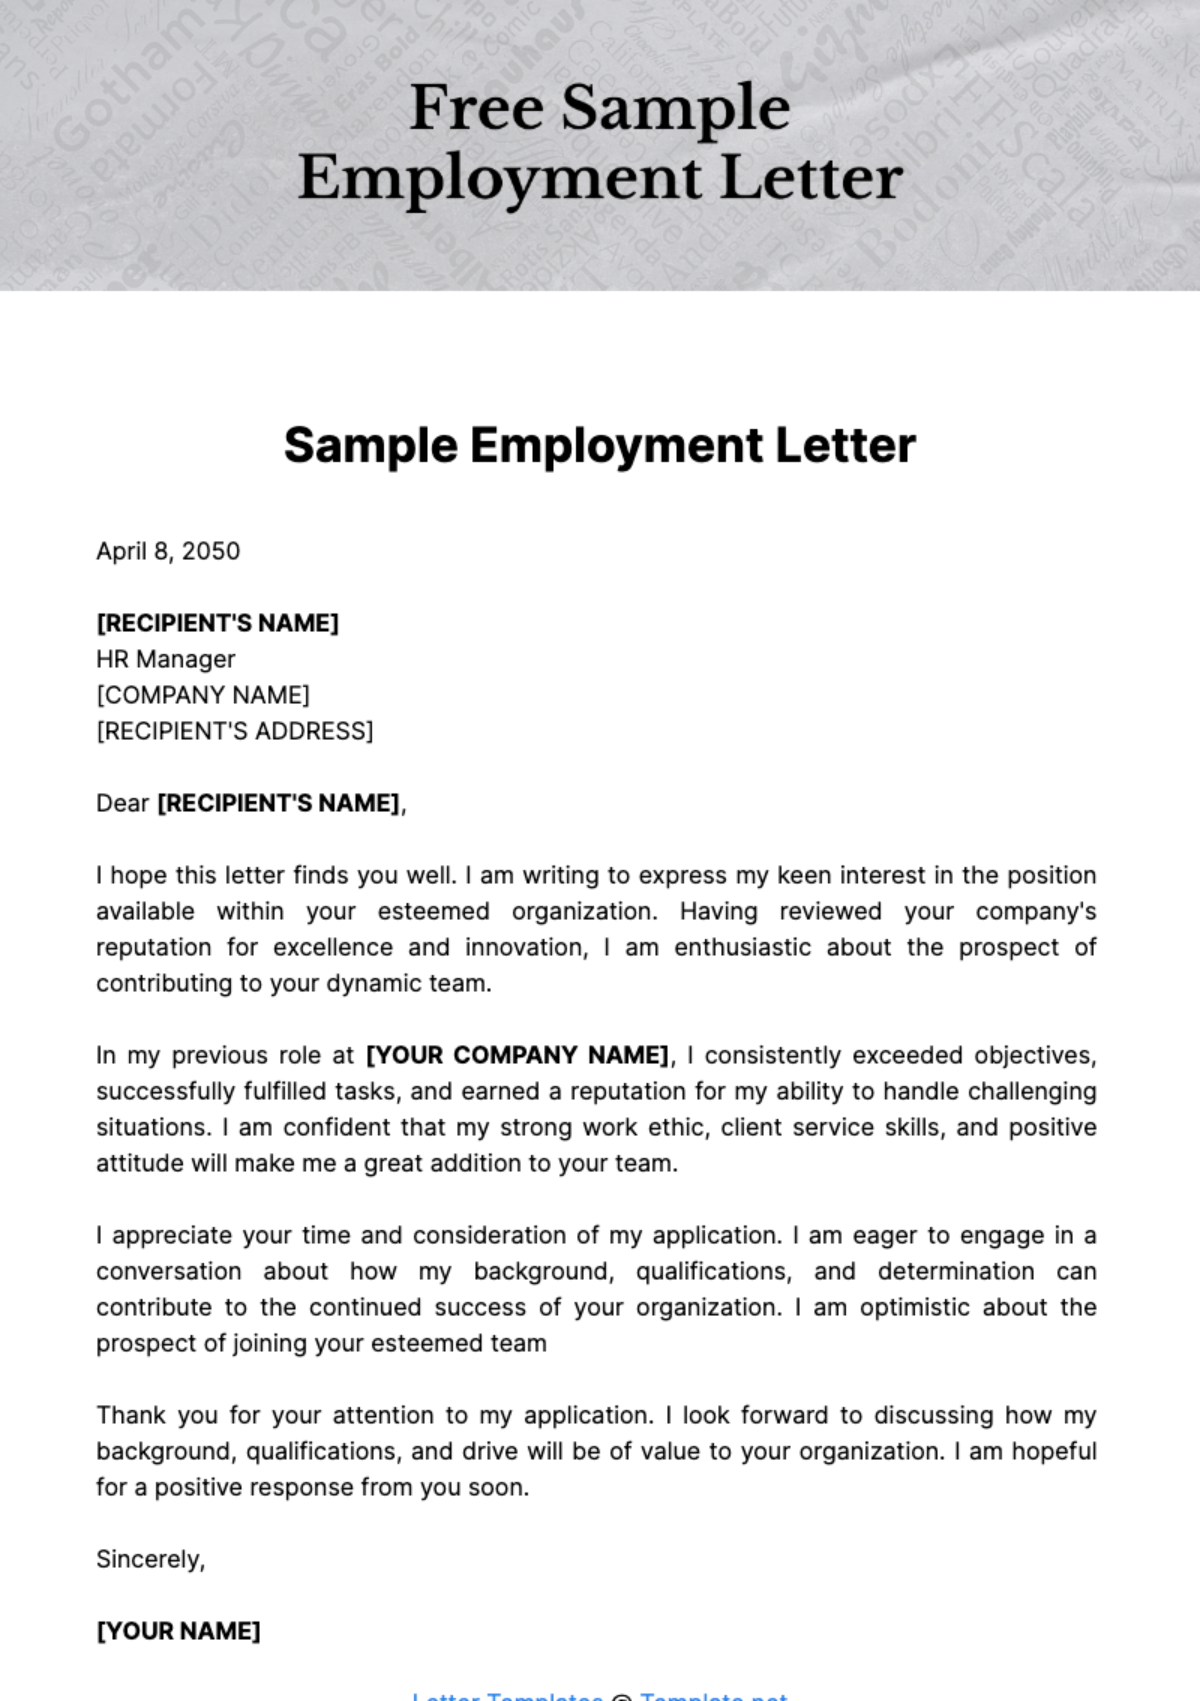 Free Sample Employment Letter Template